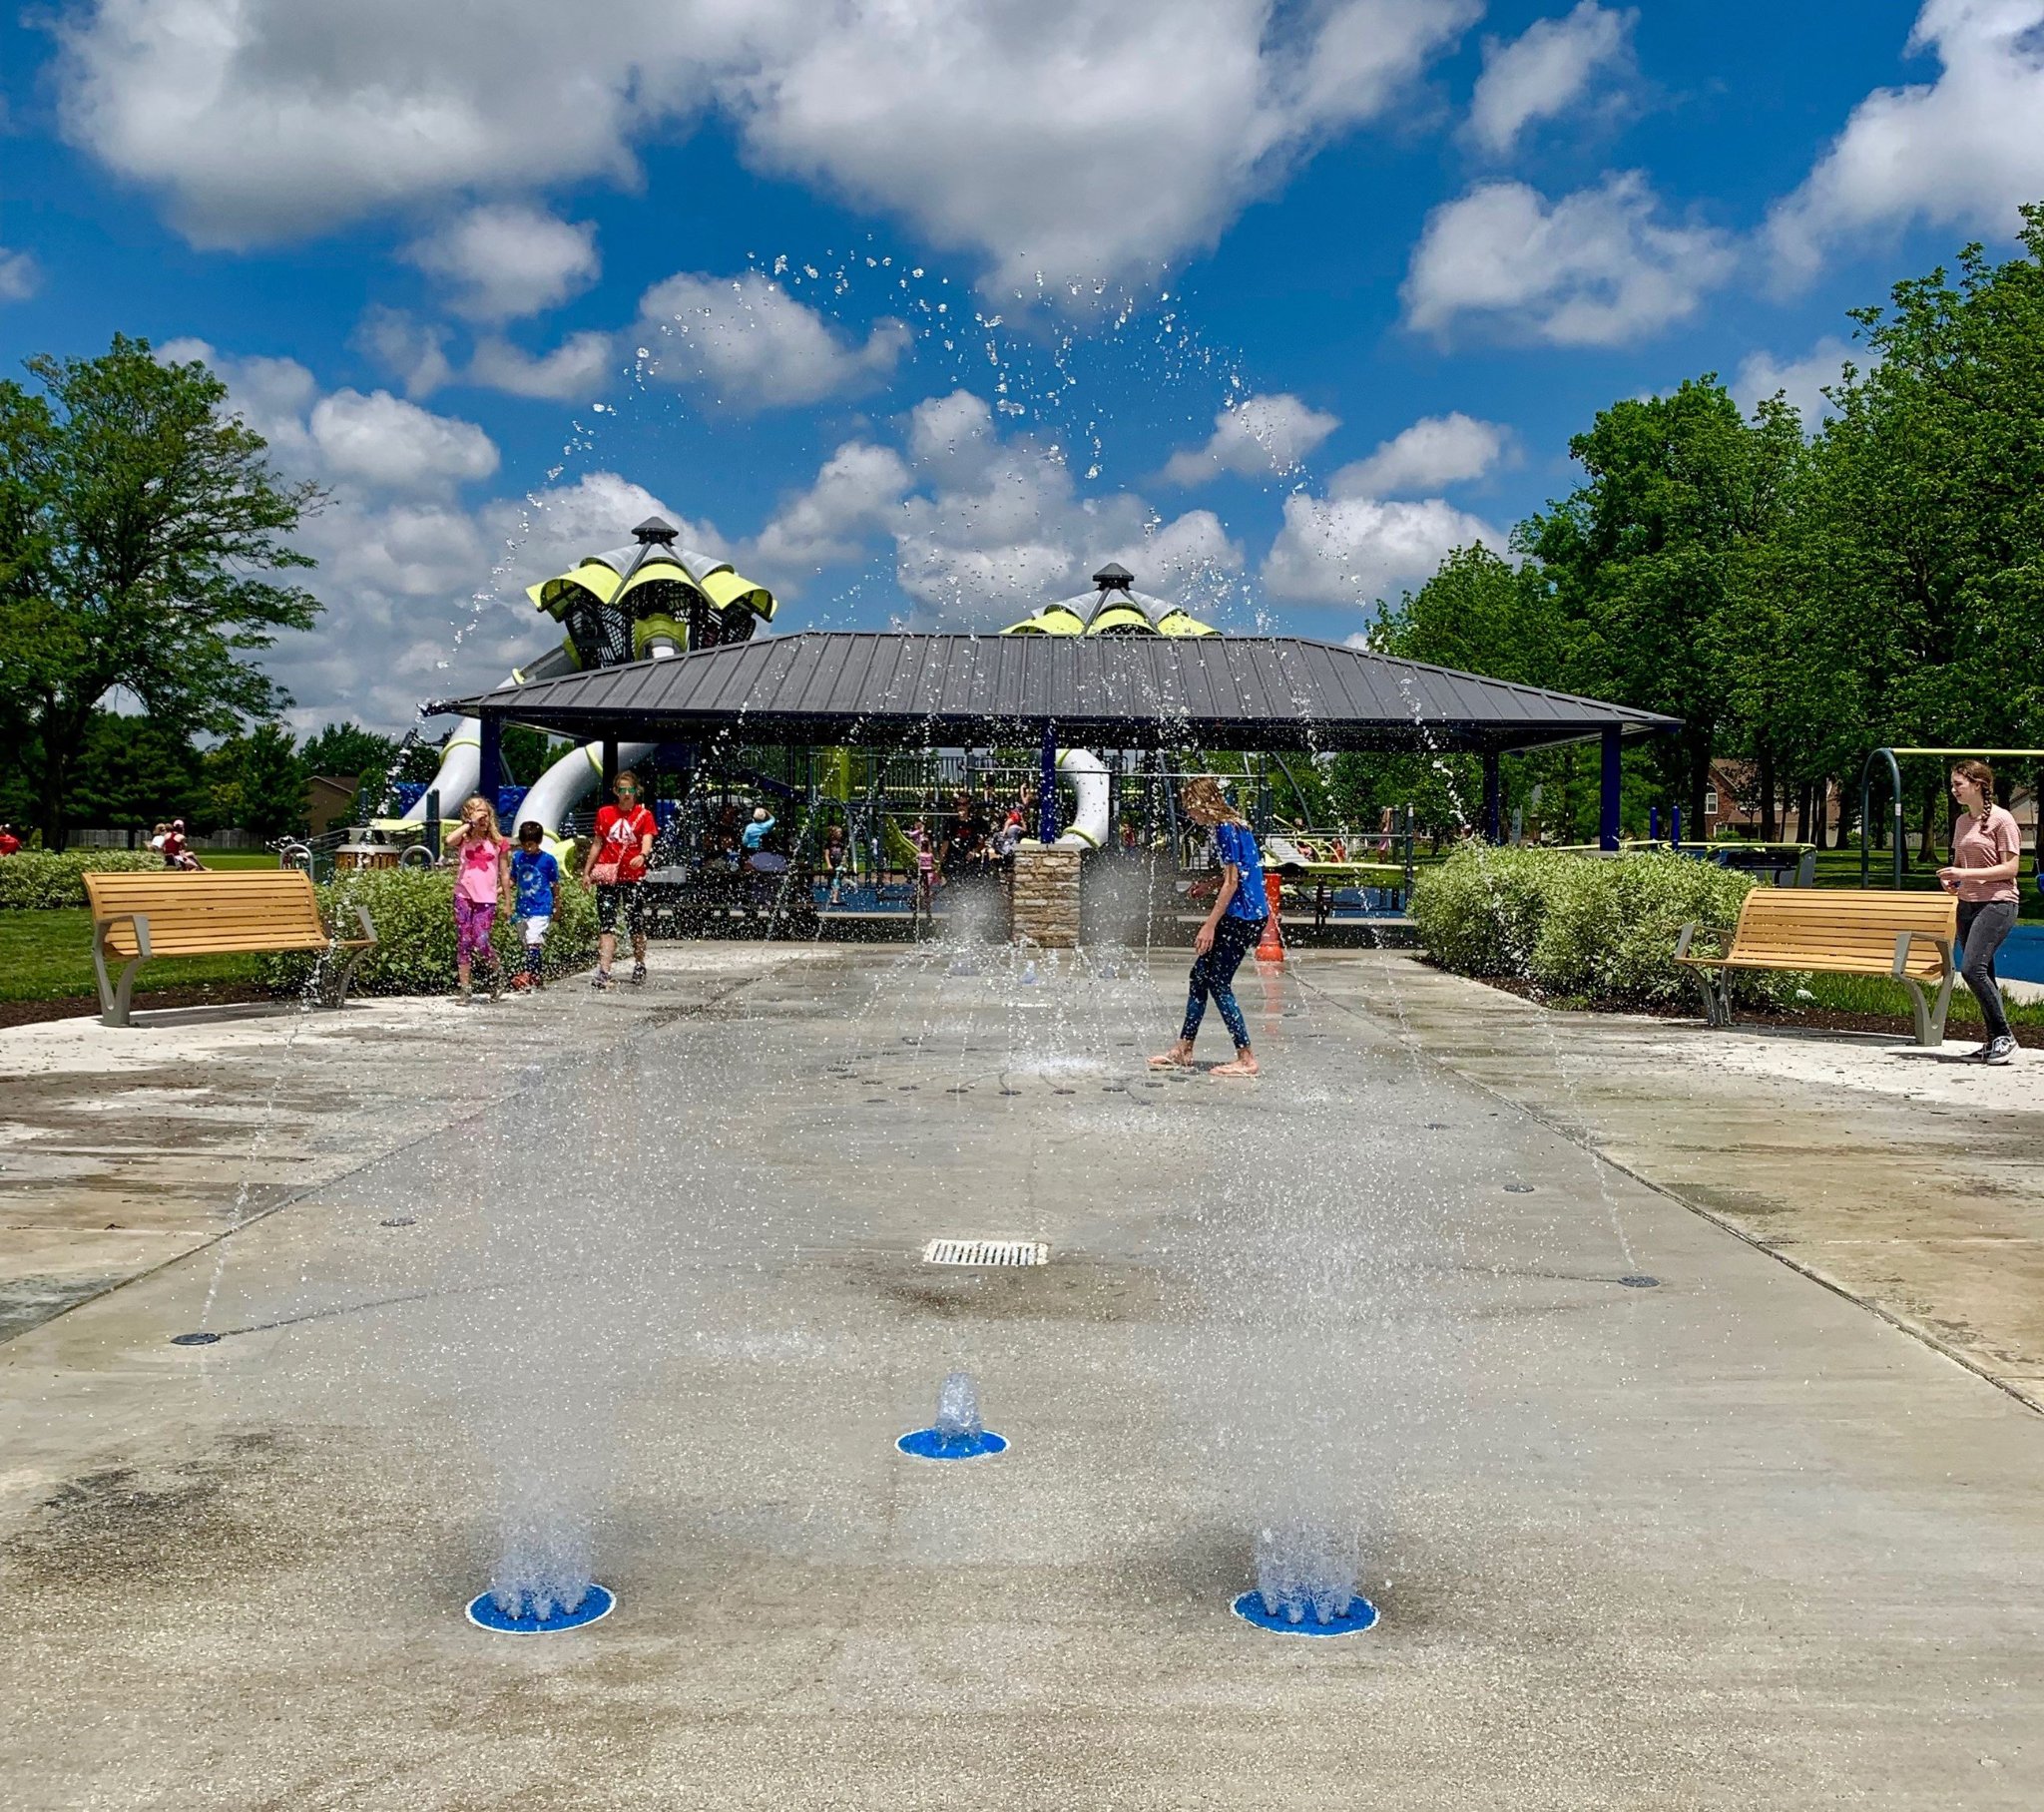 people playing in the water at the splash pad